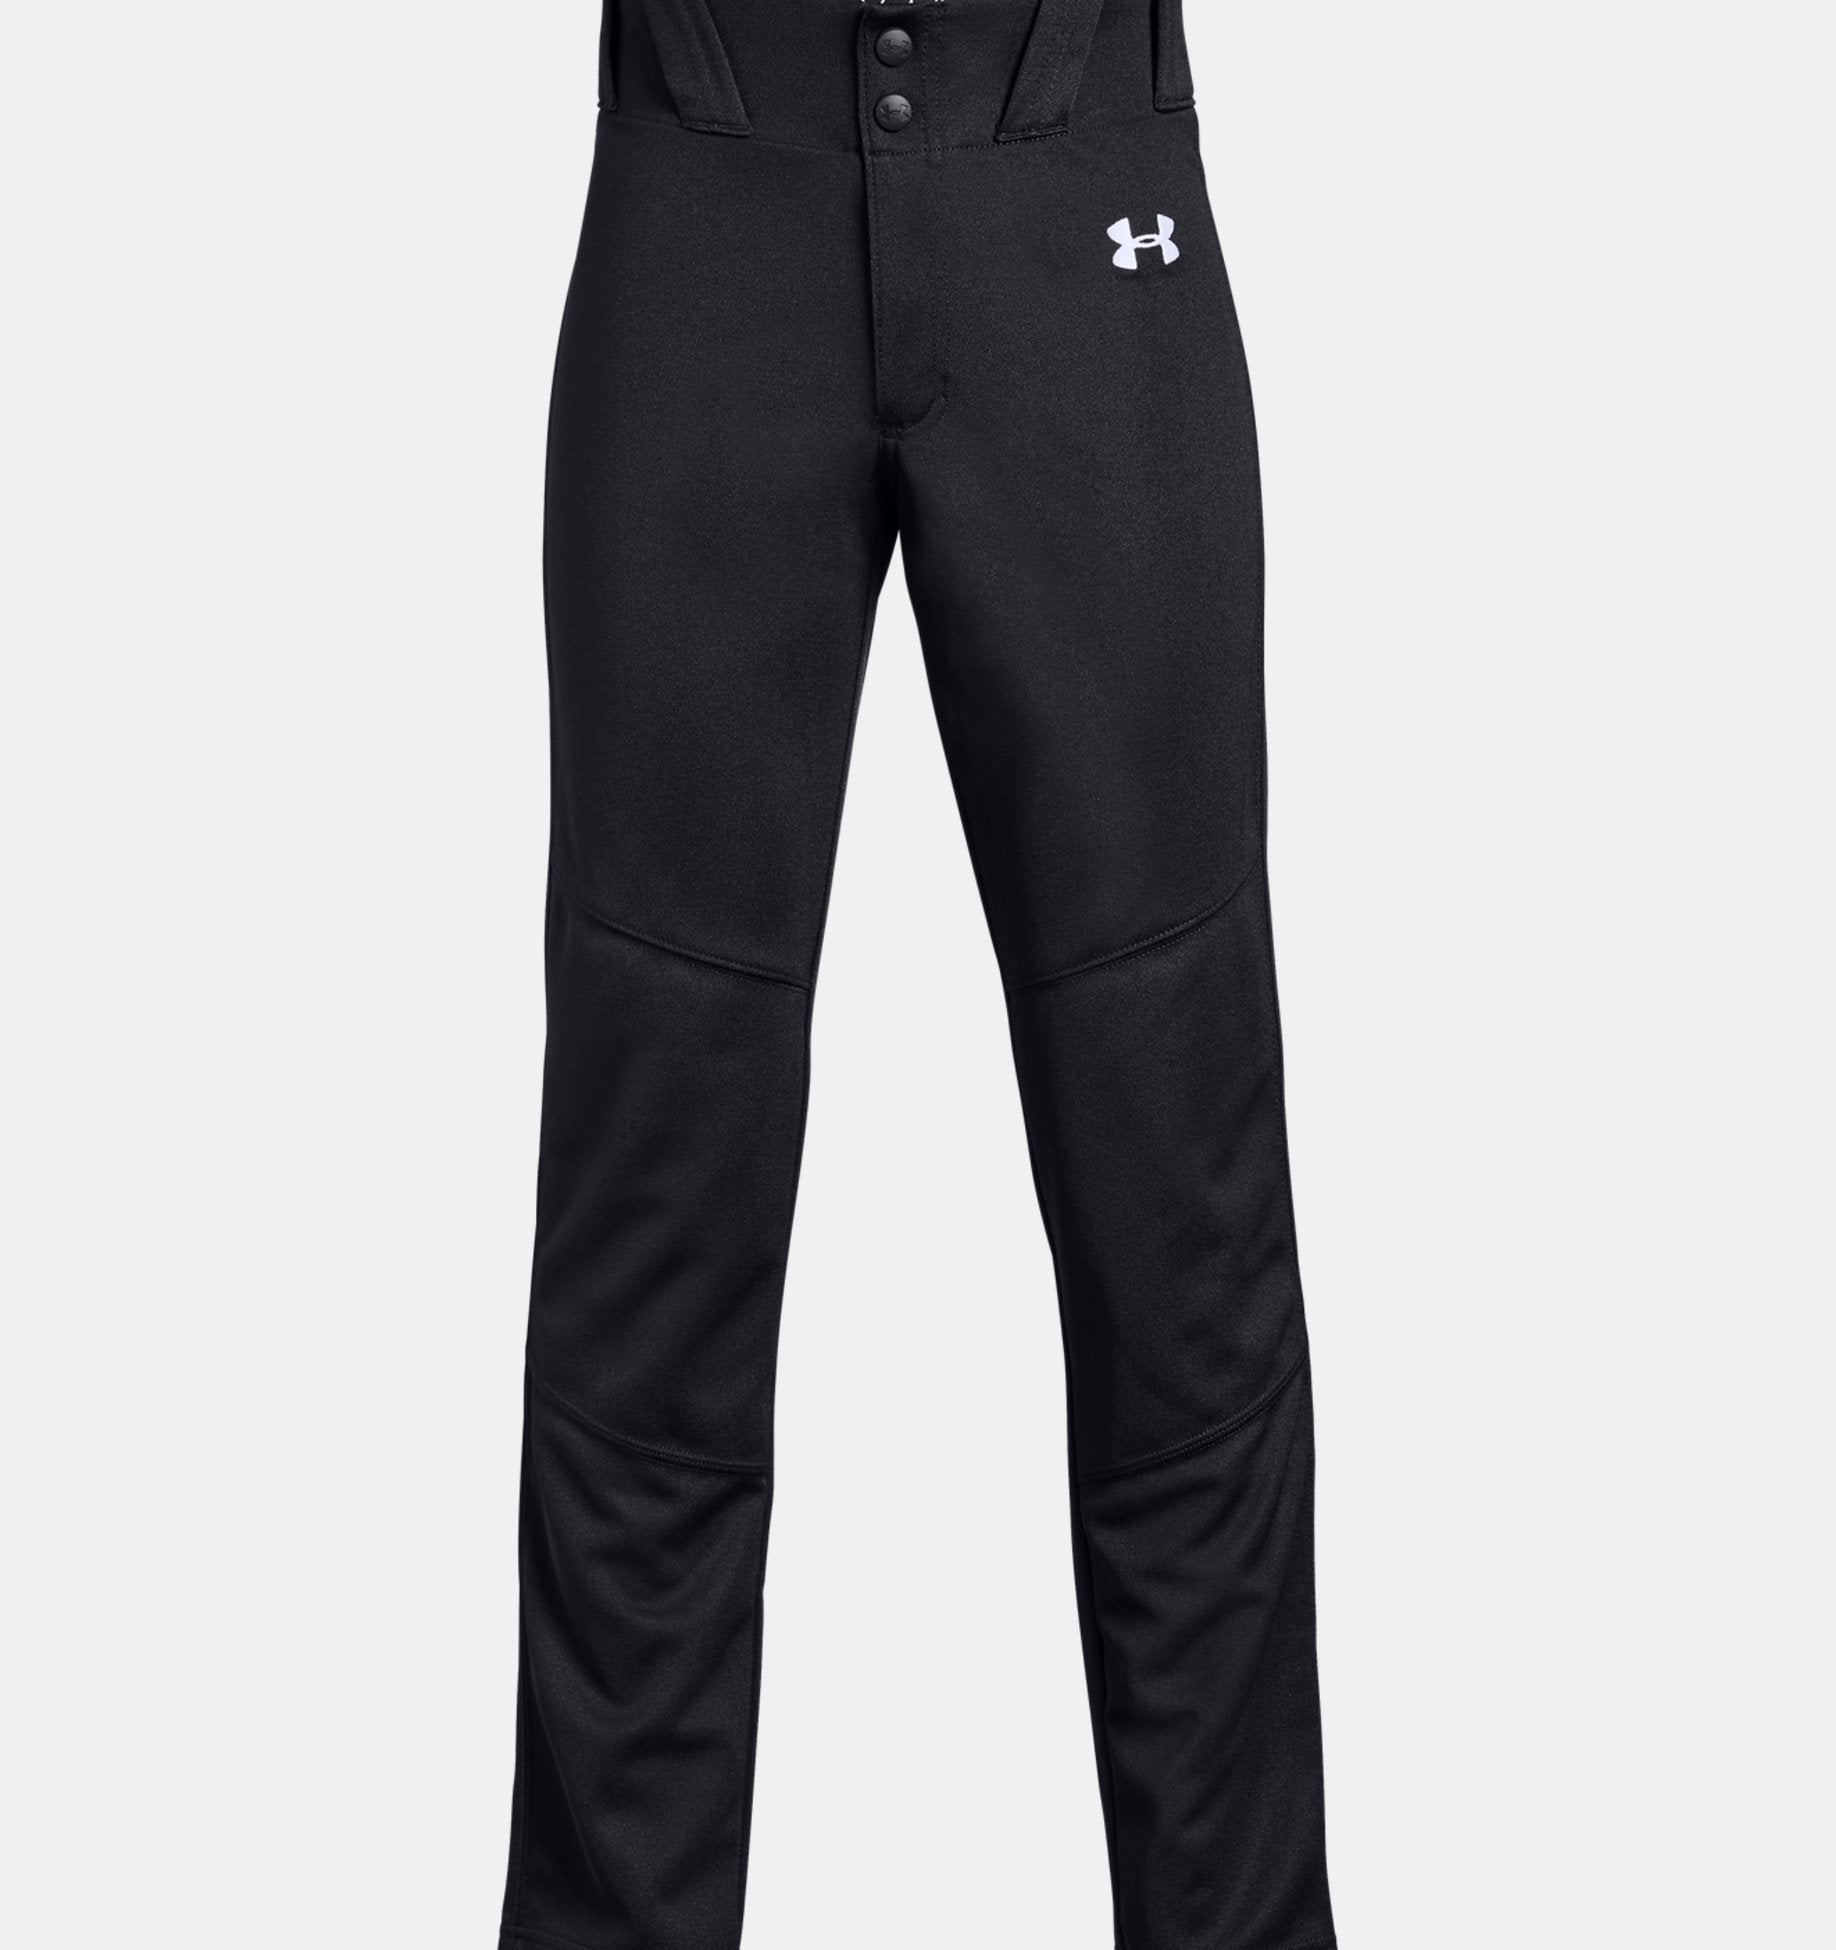 UNDER ARMOUR JUNIOR UTILITY BASEBALL PANTS-Sports Replay - Sports Excellence-Sports Replay - Sports Excellence